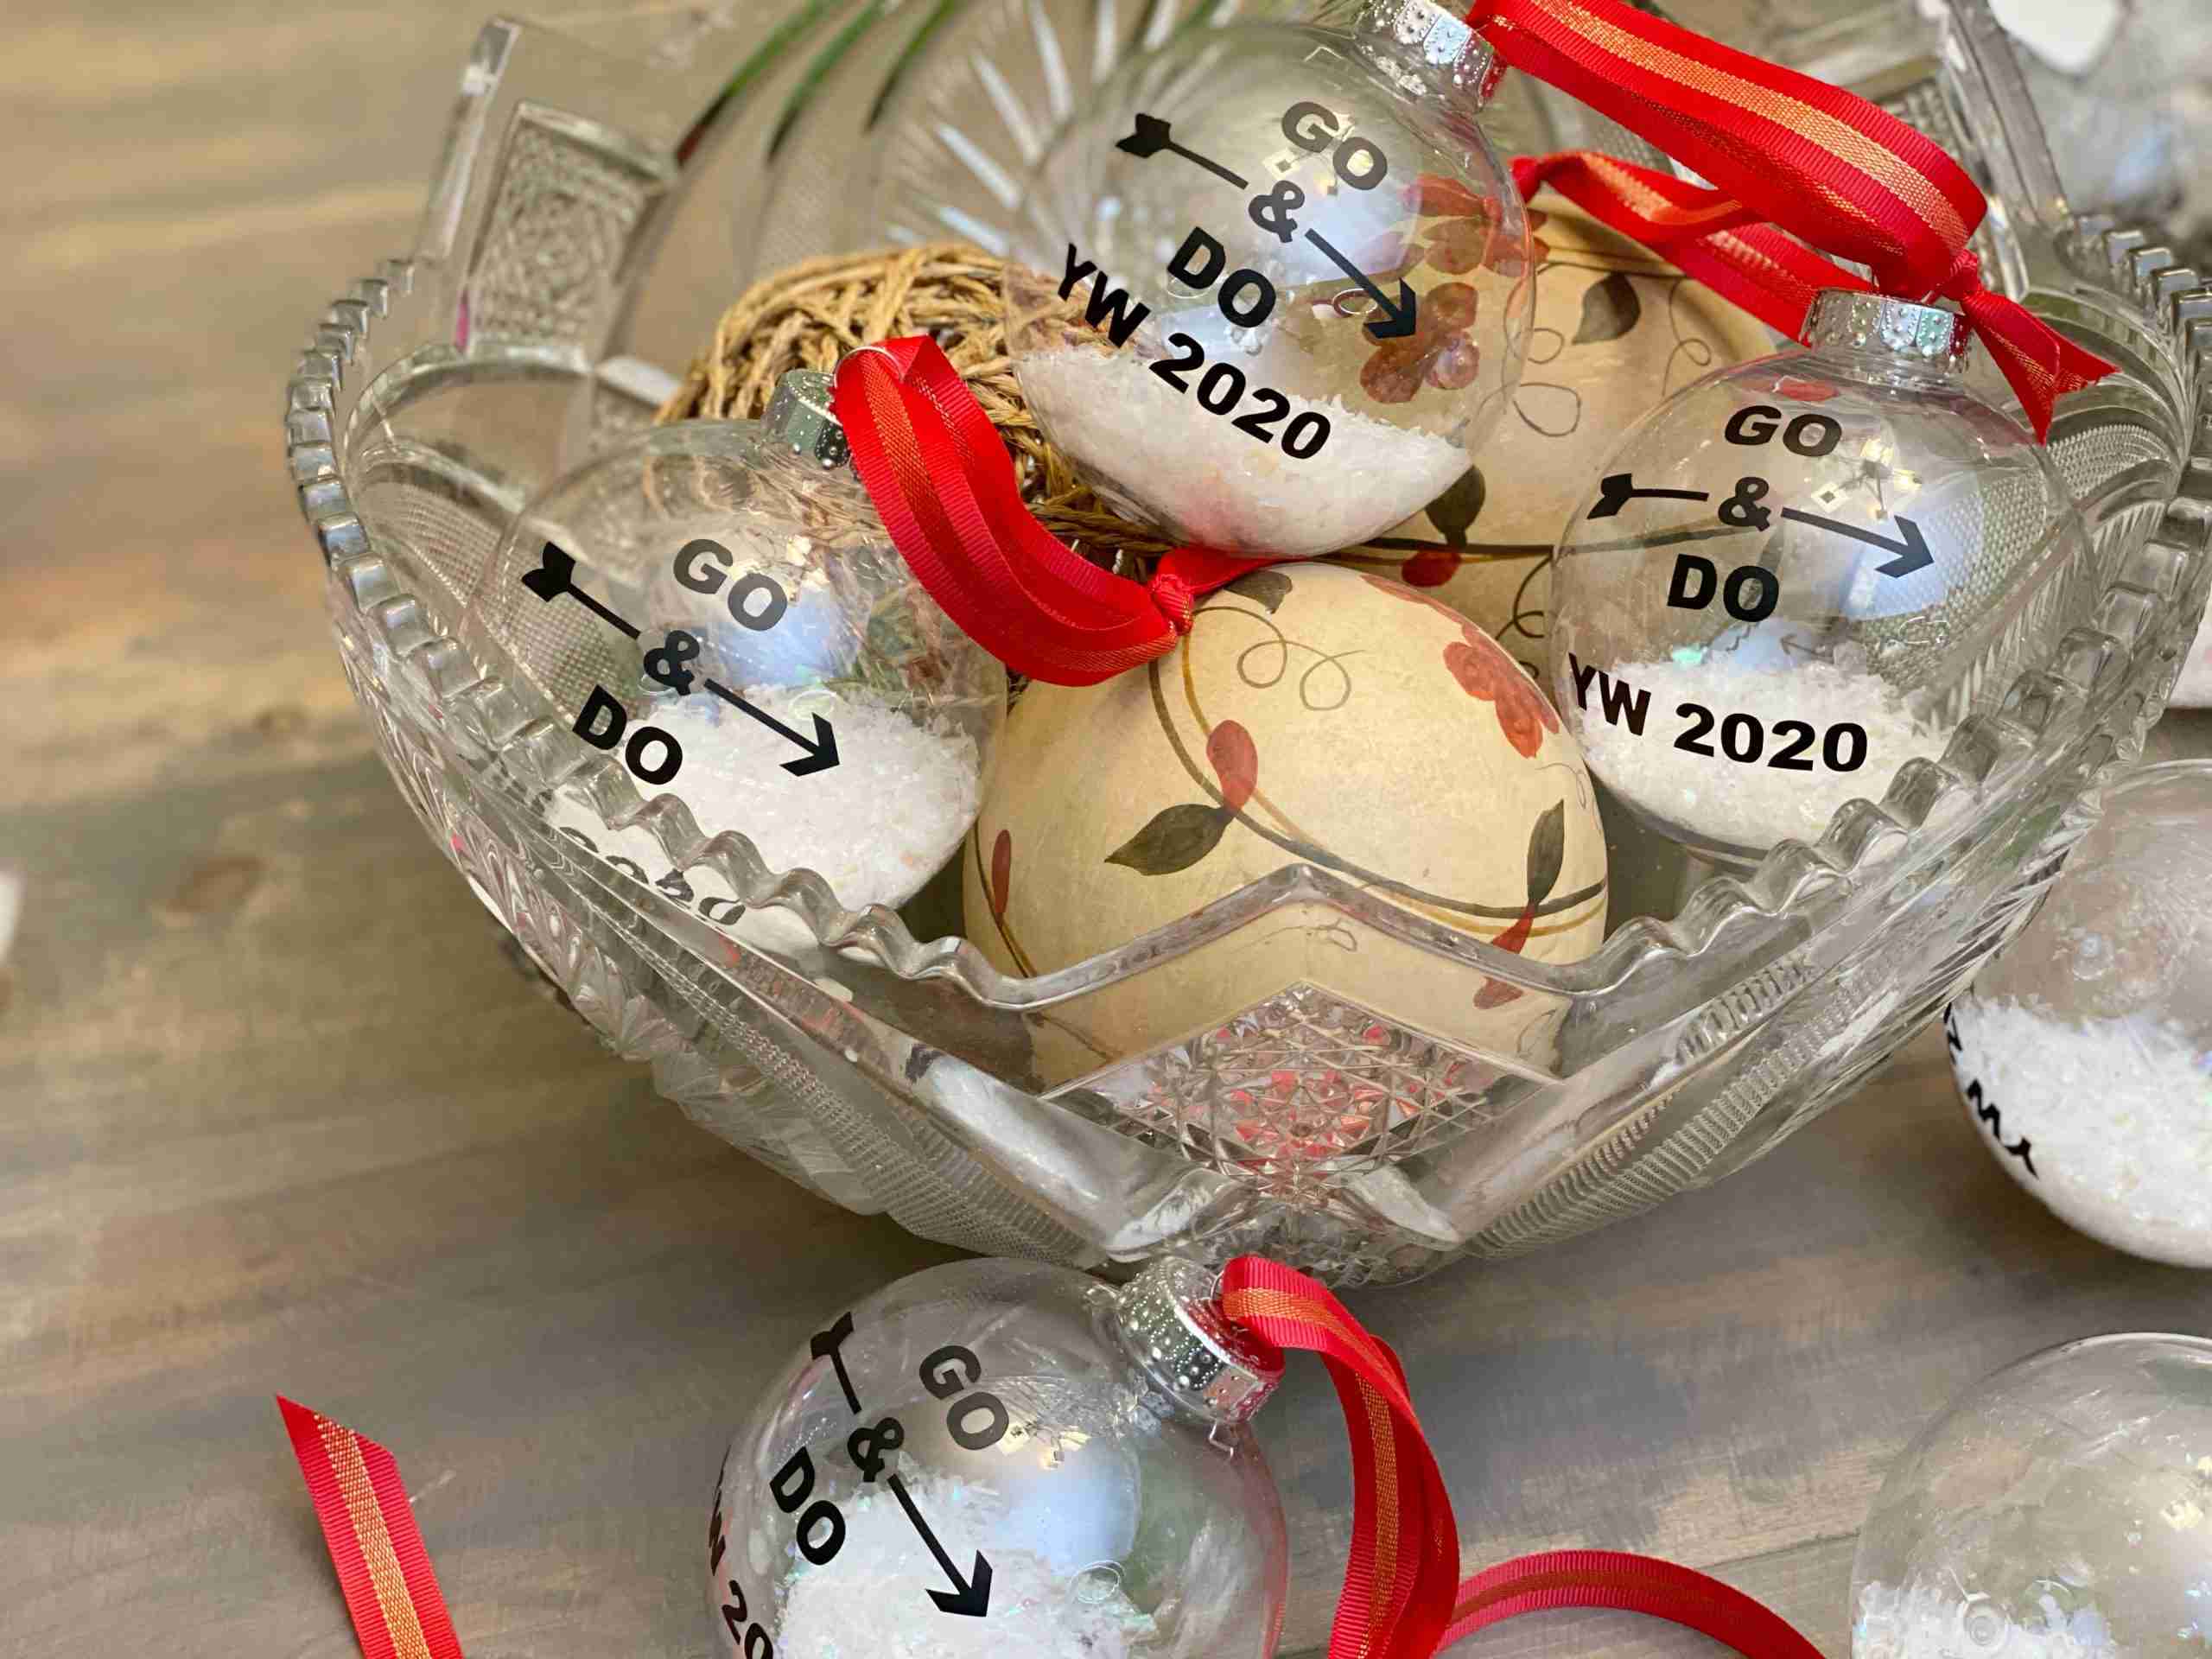 vintage punch bowl, crystal punch bowl, antique punch bowl, lds christmas ornaments, craft ornaments, DIY YW Christmas ornament, 2020 youth theme, go and do, the church of jesus christ of latter day saints, easy to make christmas ornaments, free svg file, red ribbon, clear ball ornaments, plastic ornaments, vintage crystal bowl